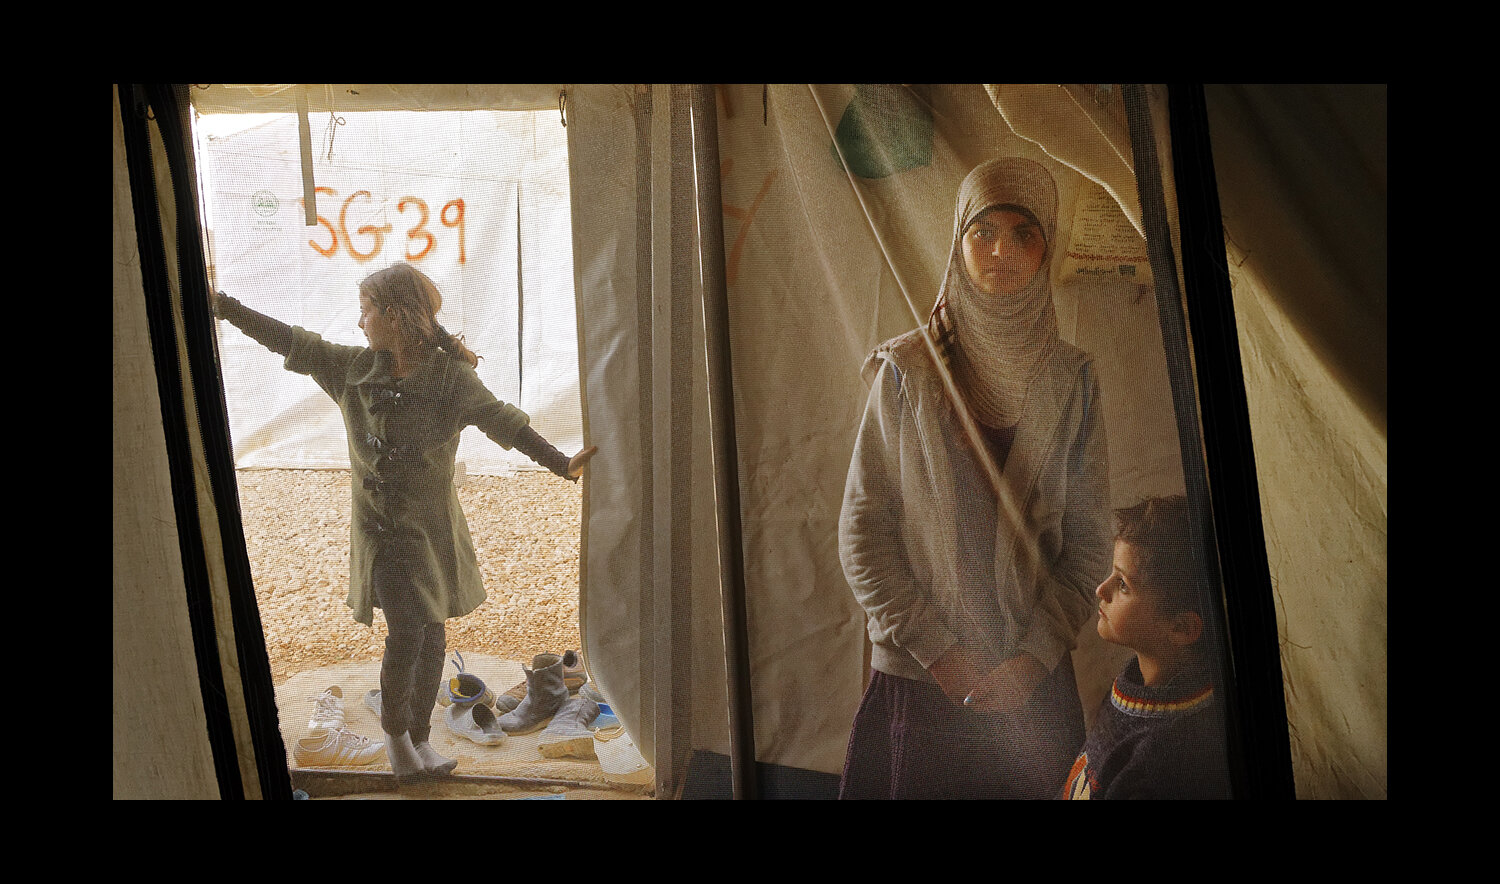  Siblings in their family tent at the Al Za'atri refugee camp for Syrians, near Mafraq, Jordan. 2013 